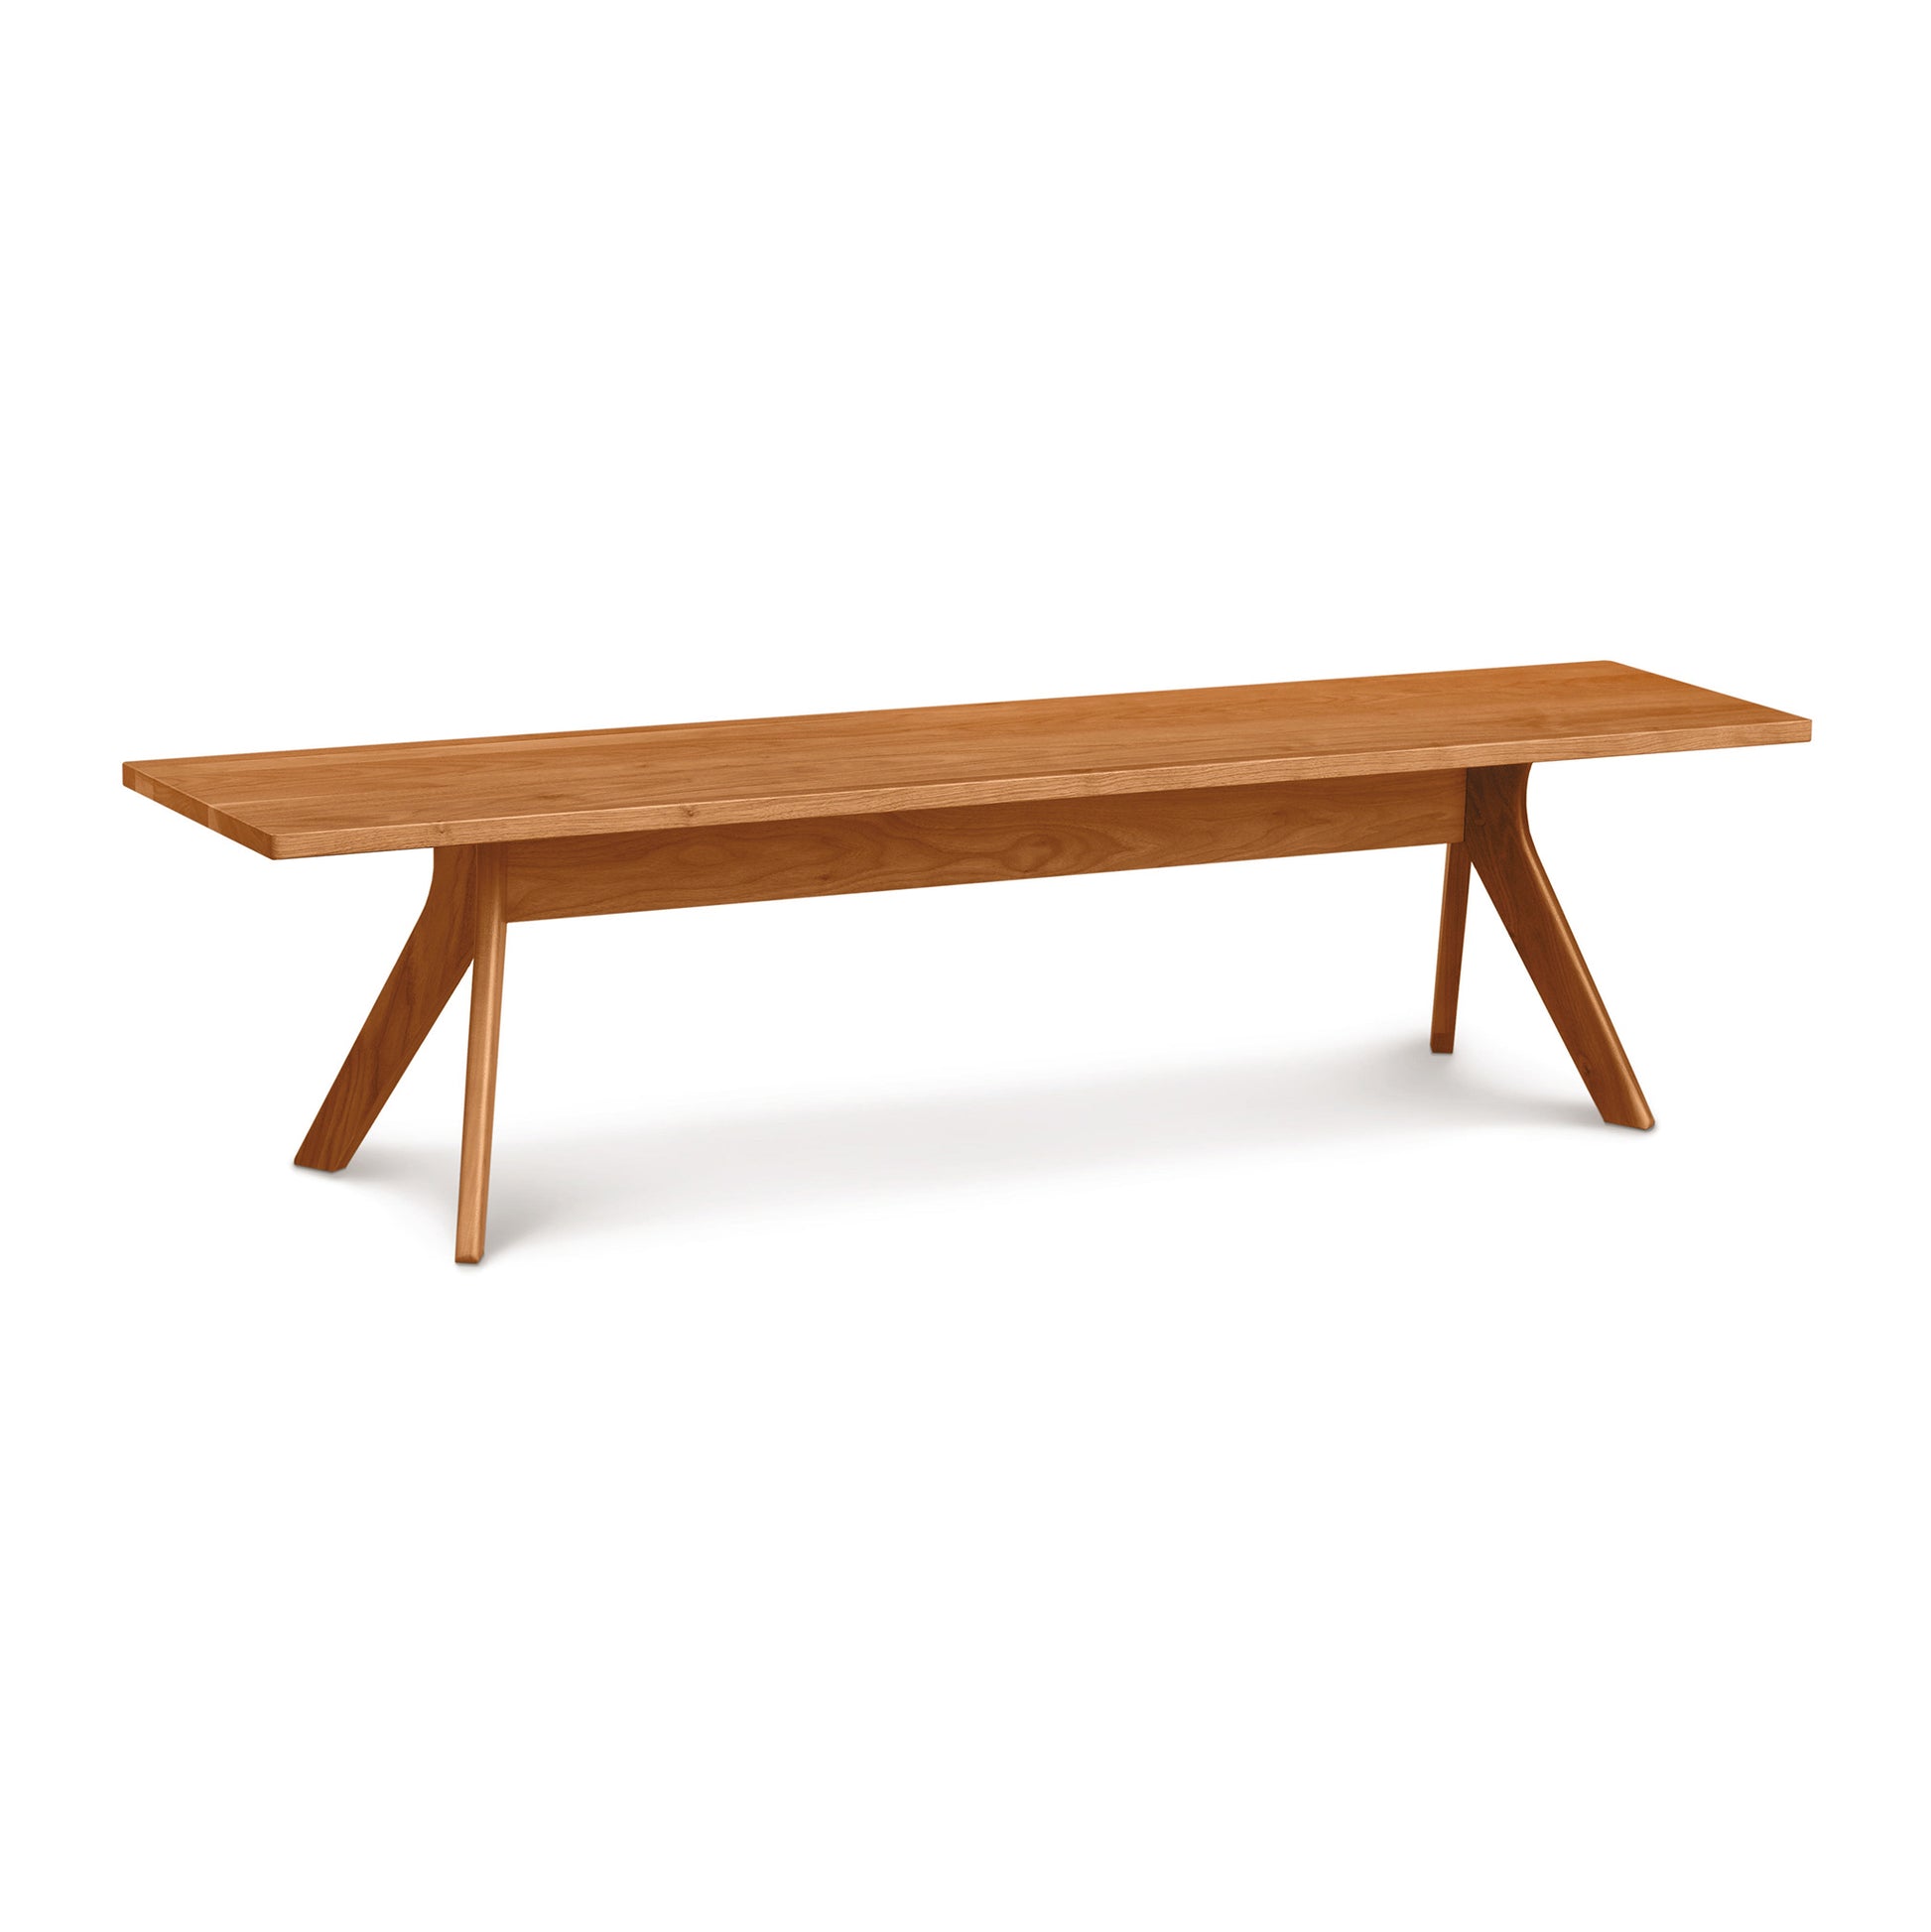 A modern handmade Copeland Furniture Audrey Cherry Dining Bench with slanted legs, isolated on a white background.